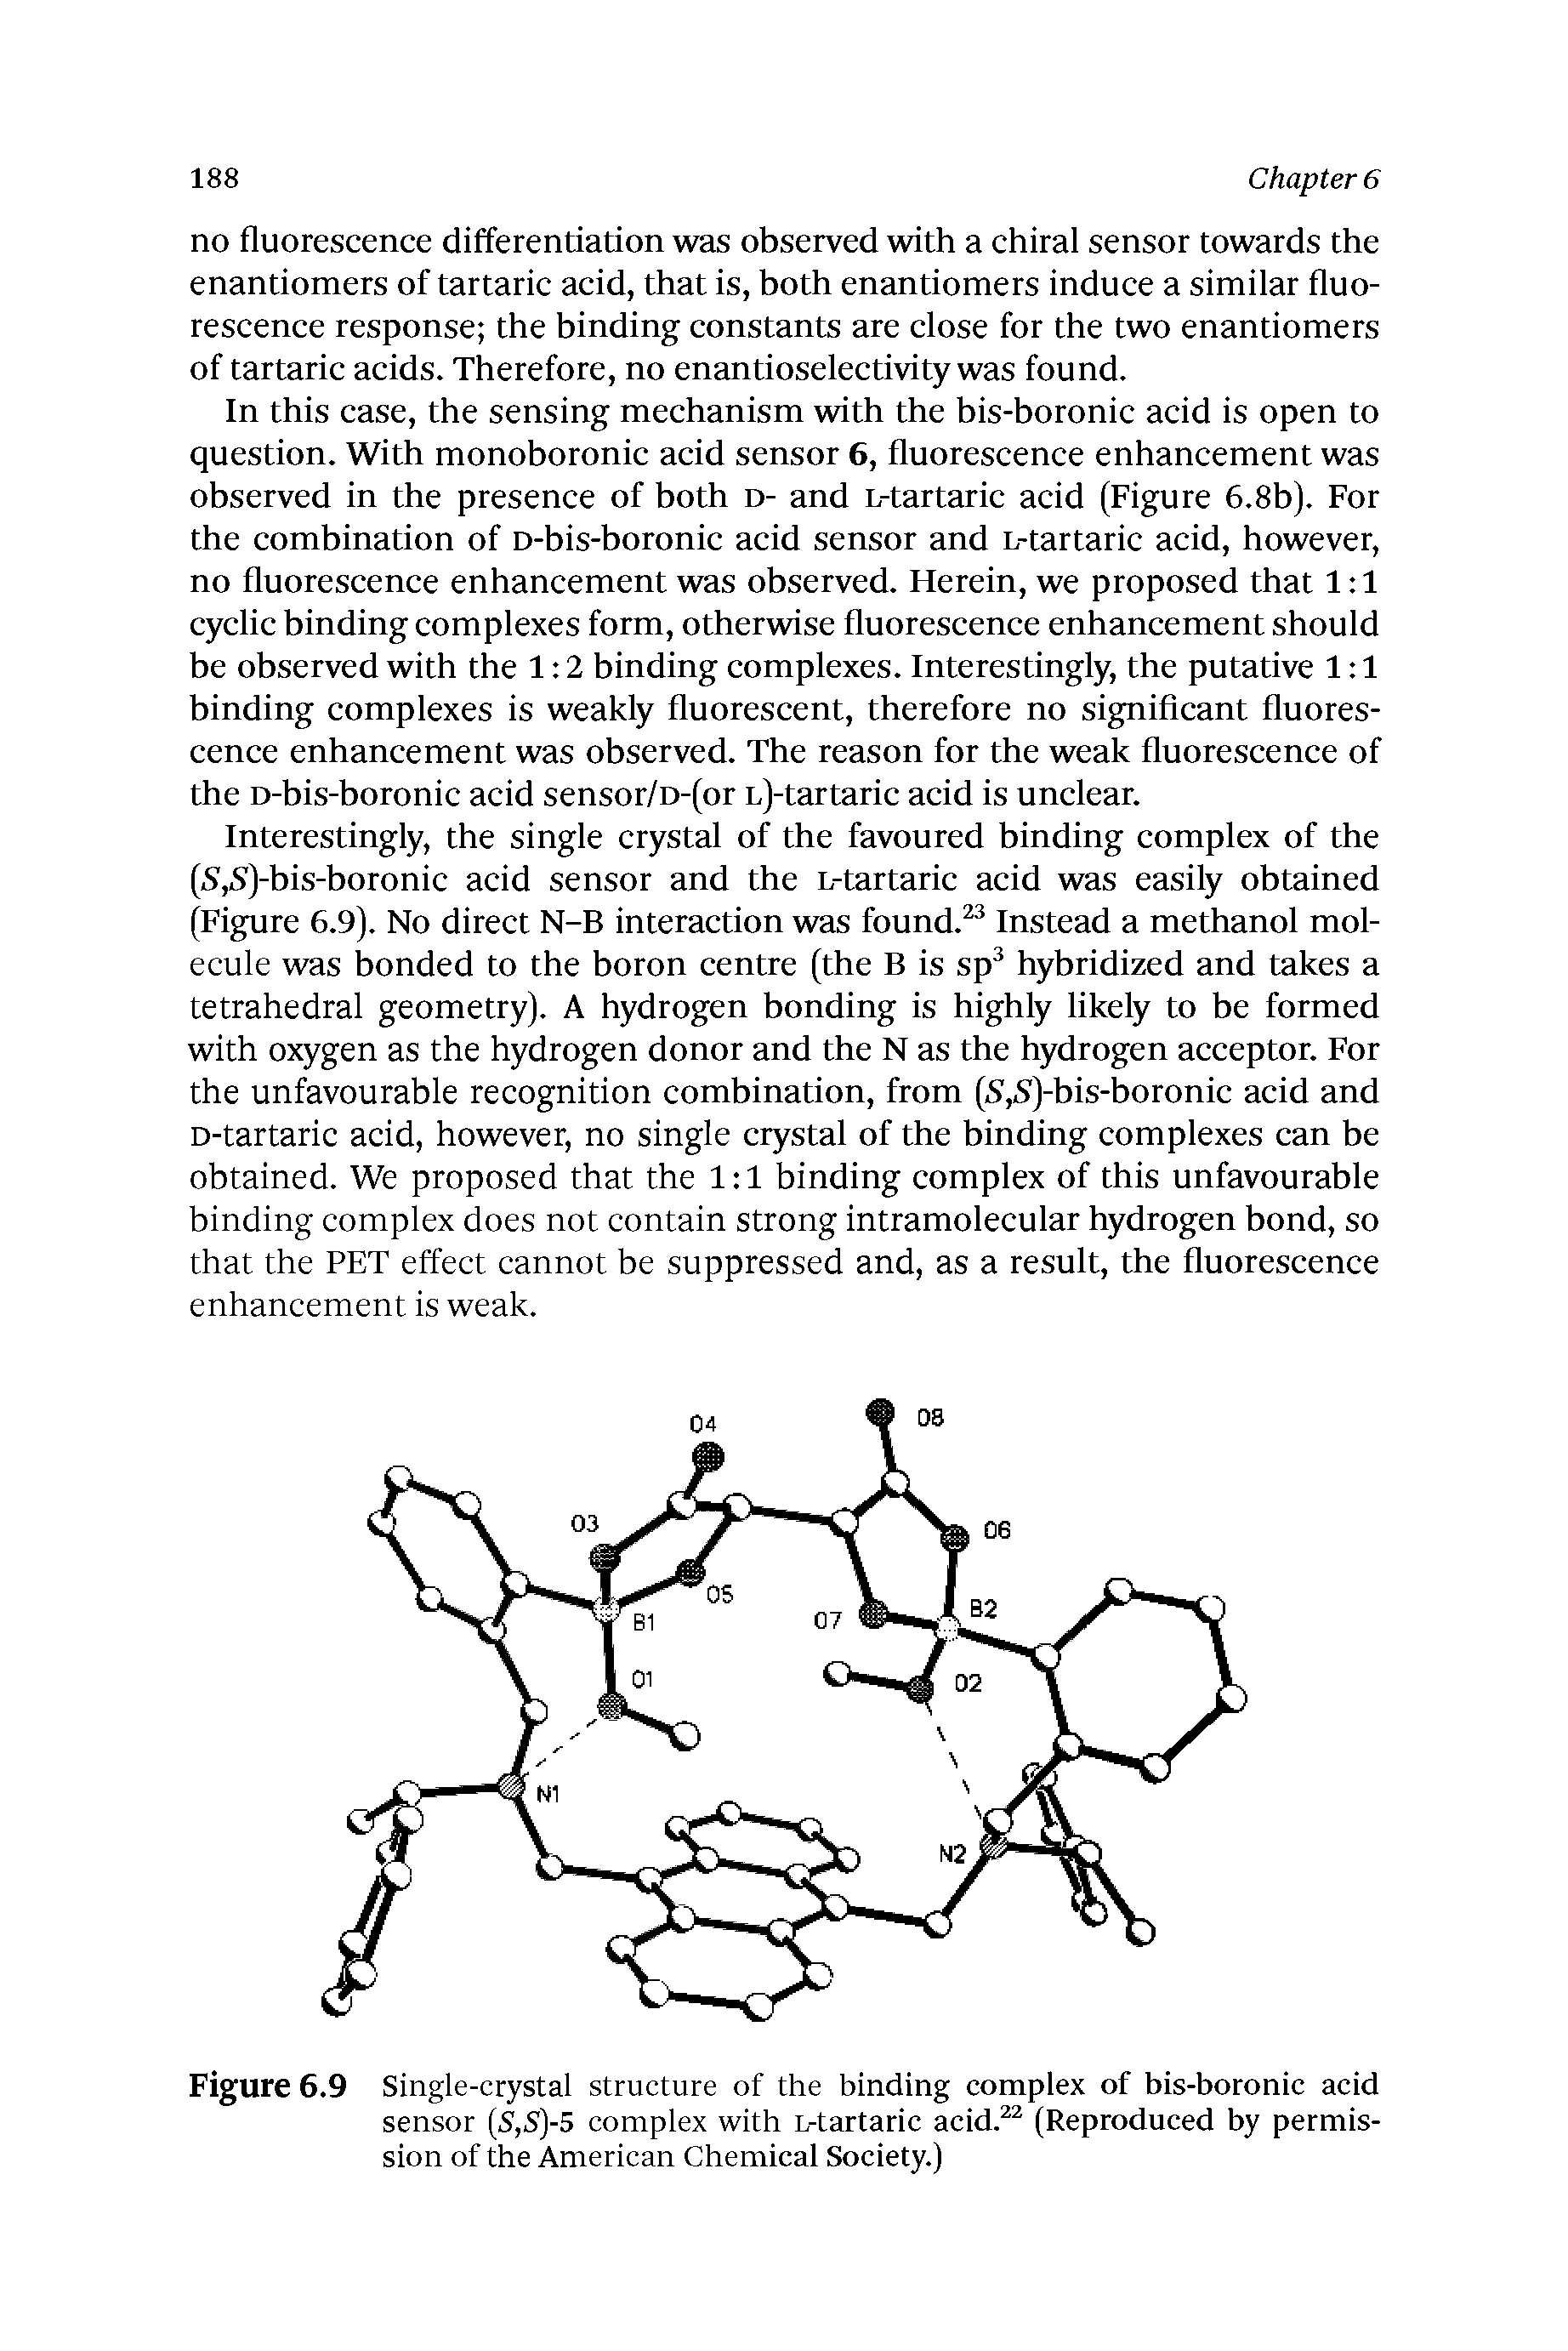 Figure 6.9 Single-crystal structure of the binding complex of bis-boronic acid sensor (5,5)-5 complex with L-tartaric acid. (Reproduced by permission of the American Chemical Society.)...